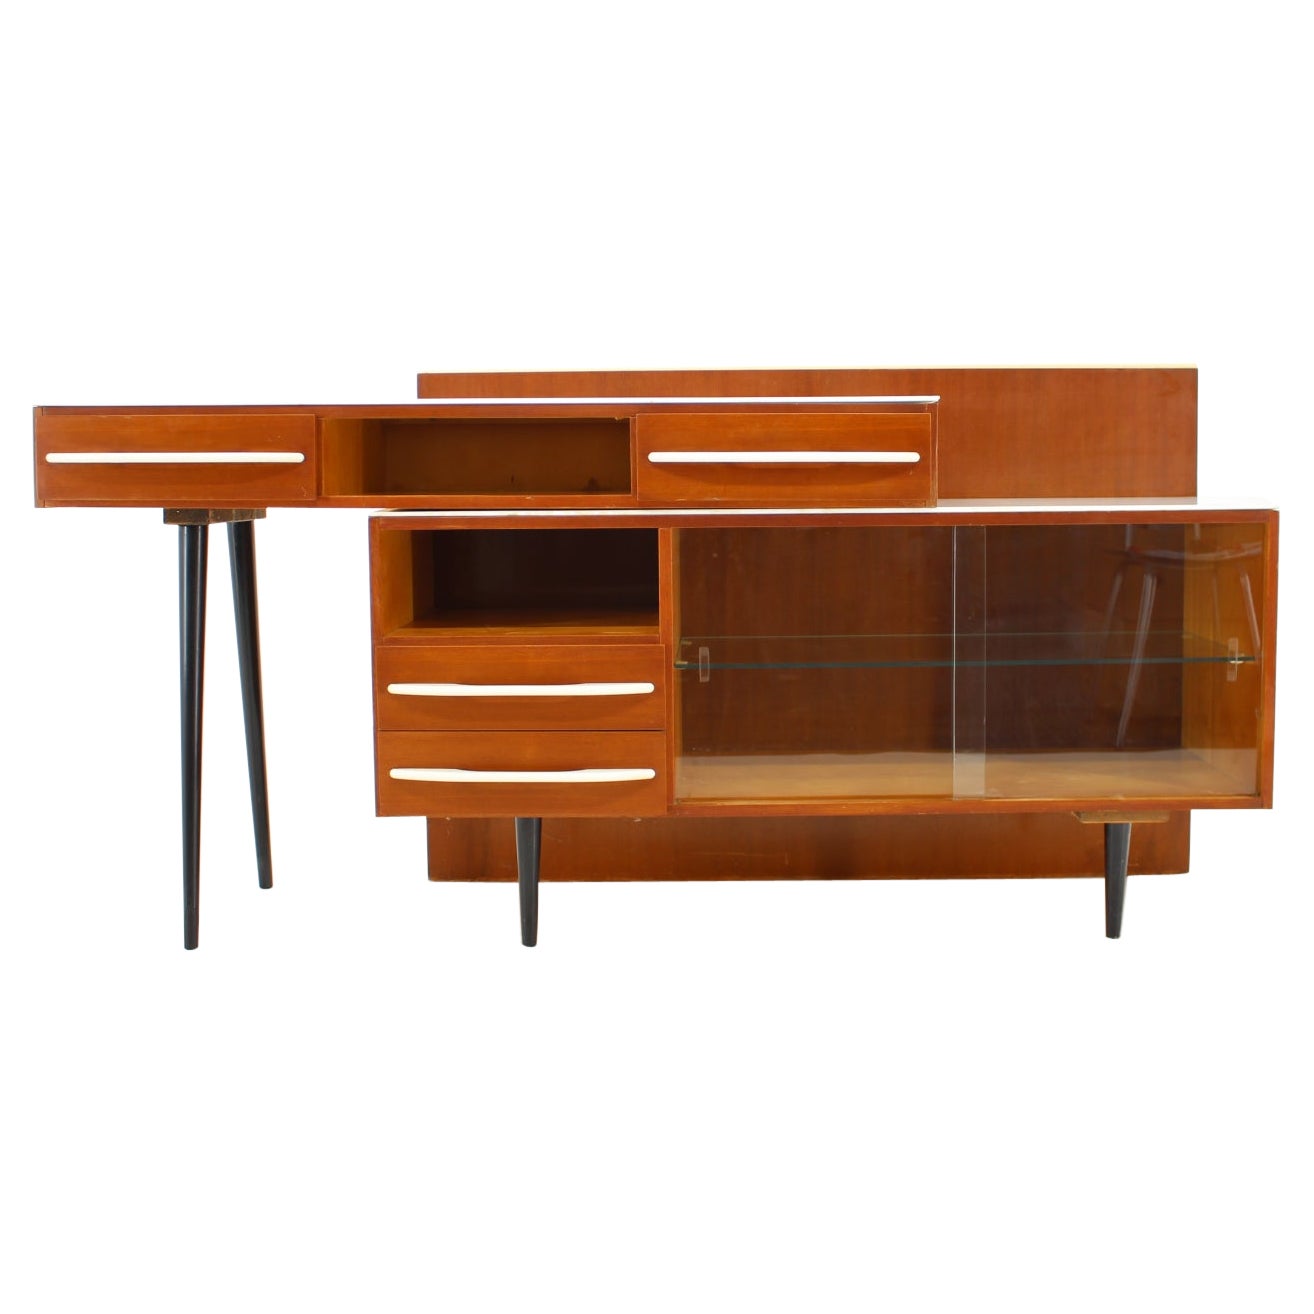 1960s M.Pozar Modular Set of Desk and Chest of Drawers, Czechoslovakia For Sale